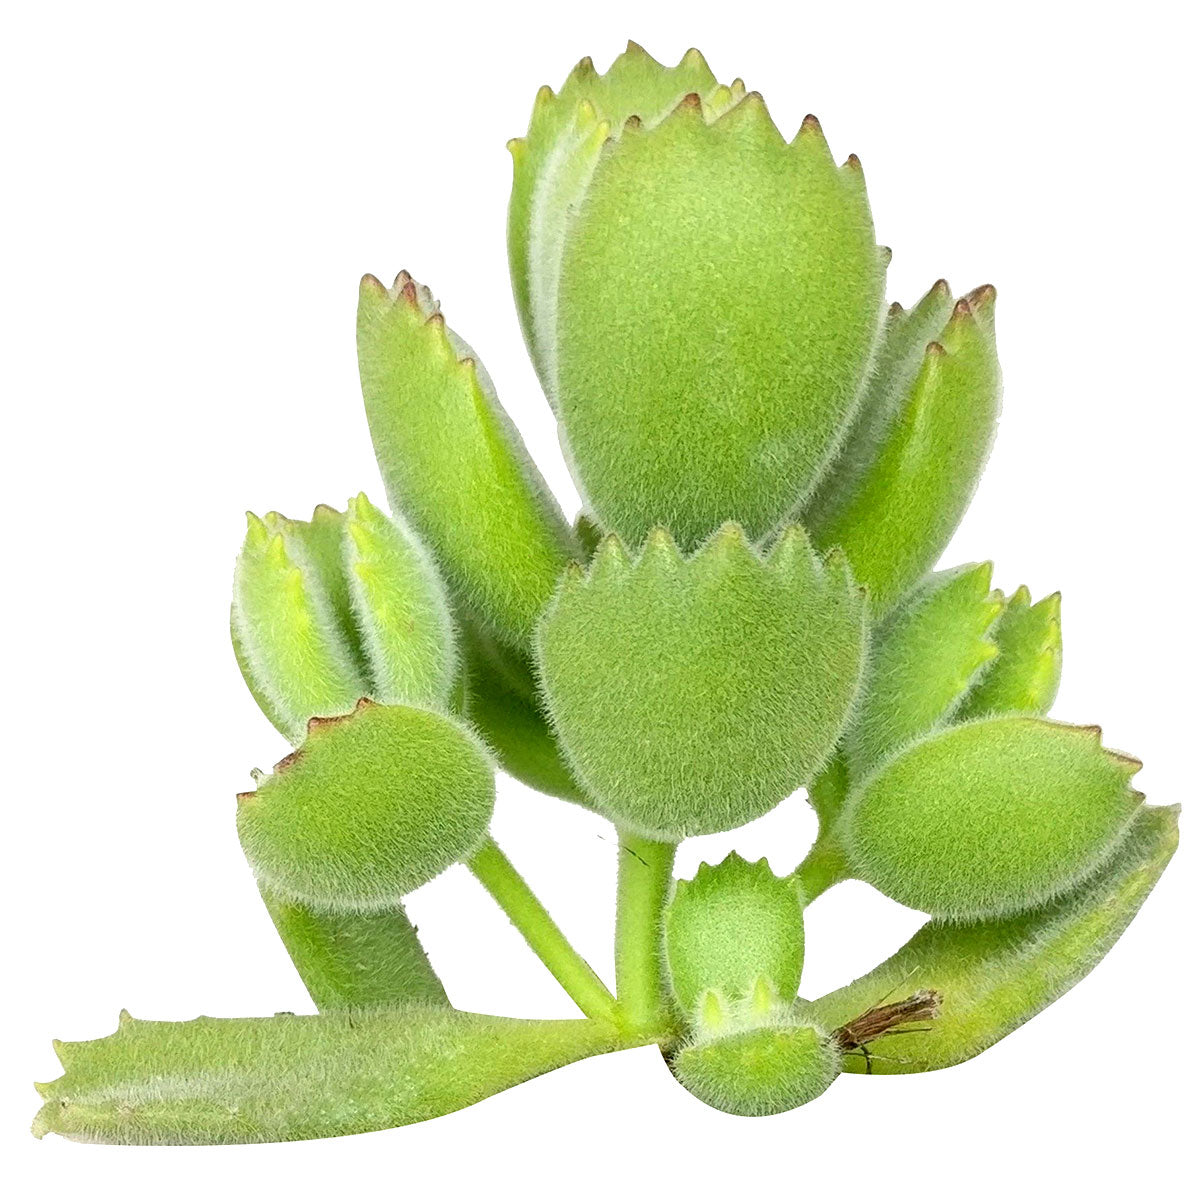 cotyledon bear paw, bear’s paw, how to grow succulents, cactus, succulent care, succulents garden, succulent subscription, succulent care guide, succulents shop in California, monthly succulents, cotyledon bear paw in California, How to grow cotyledon bear paw